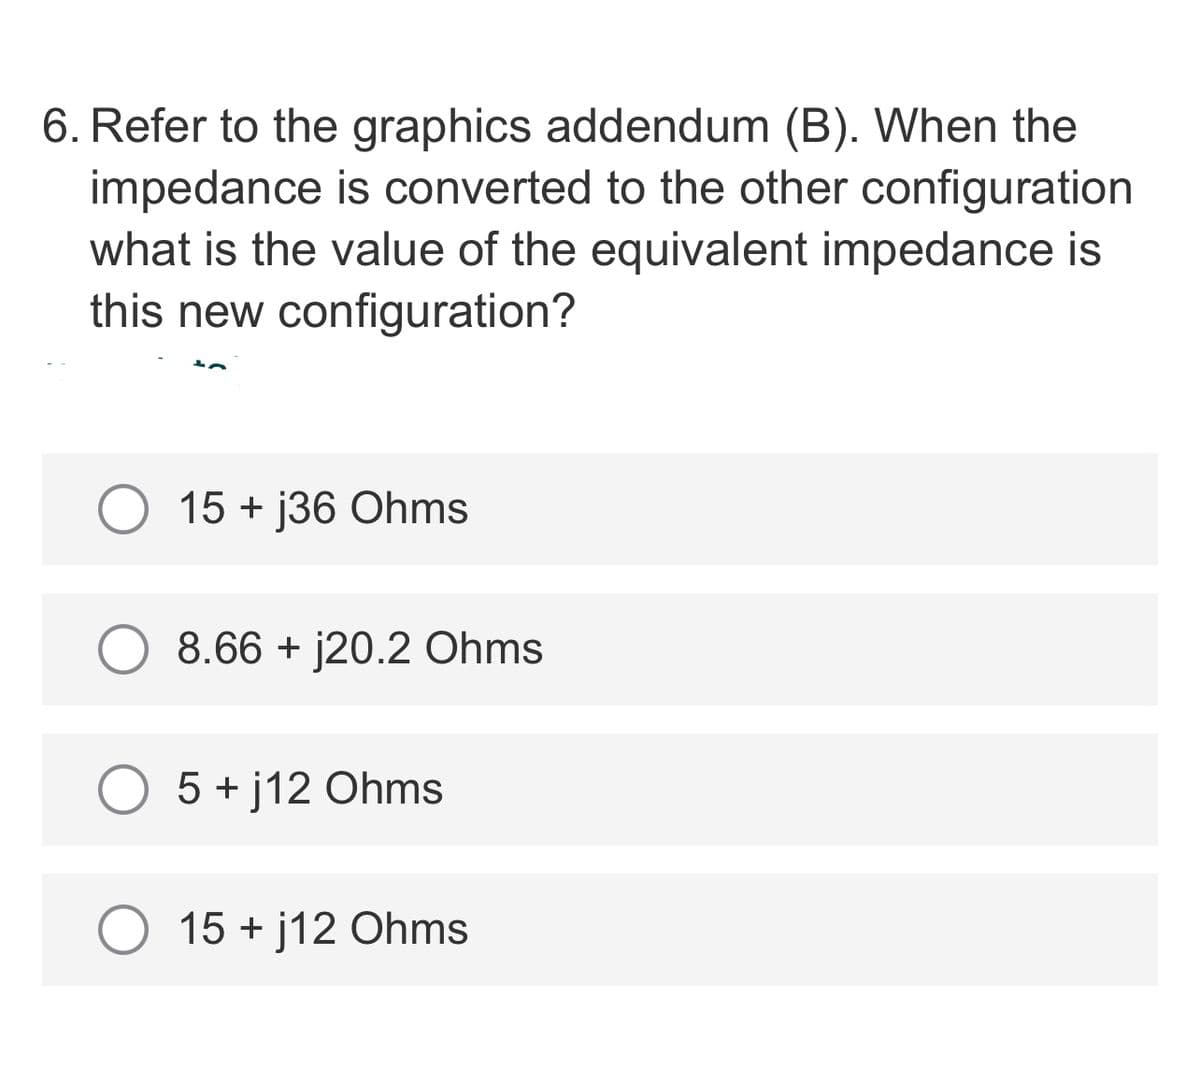 6. Refer to the graphics addendum (B). When the
impedance is converted to the other configuration
what is the value of the equivalent impedance is
this new configuration?
15 + j36 Ohms
8.66 + j20.2 Ohms
5 + j12 Ohms
O 15 + j12 Ohms